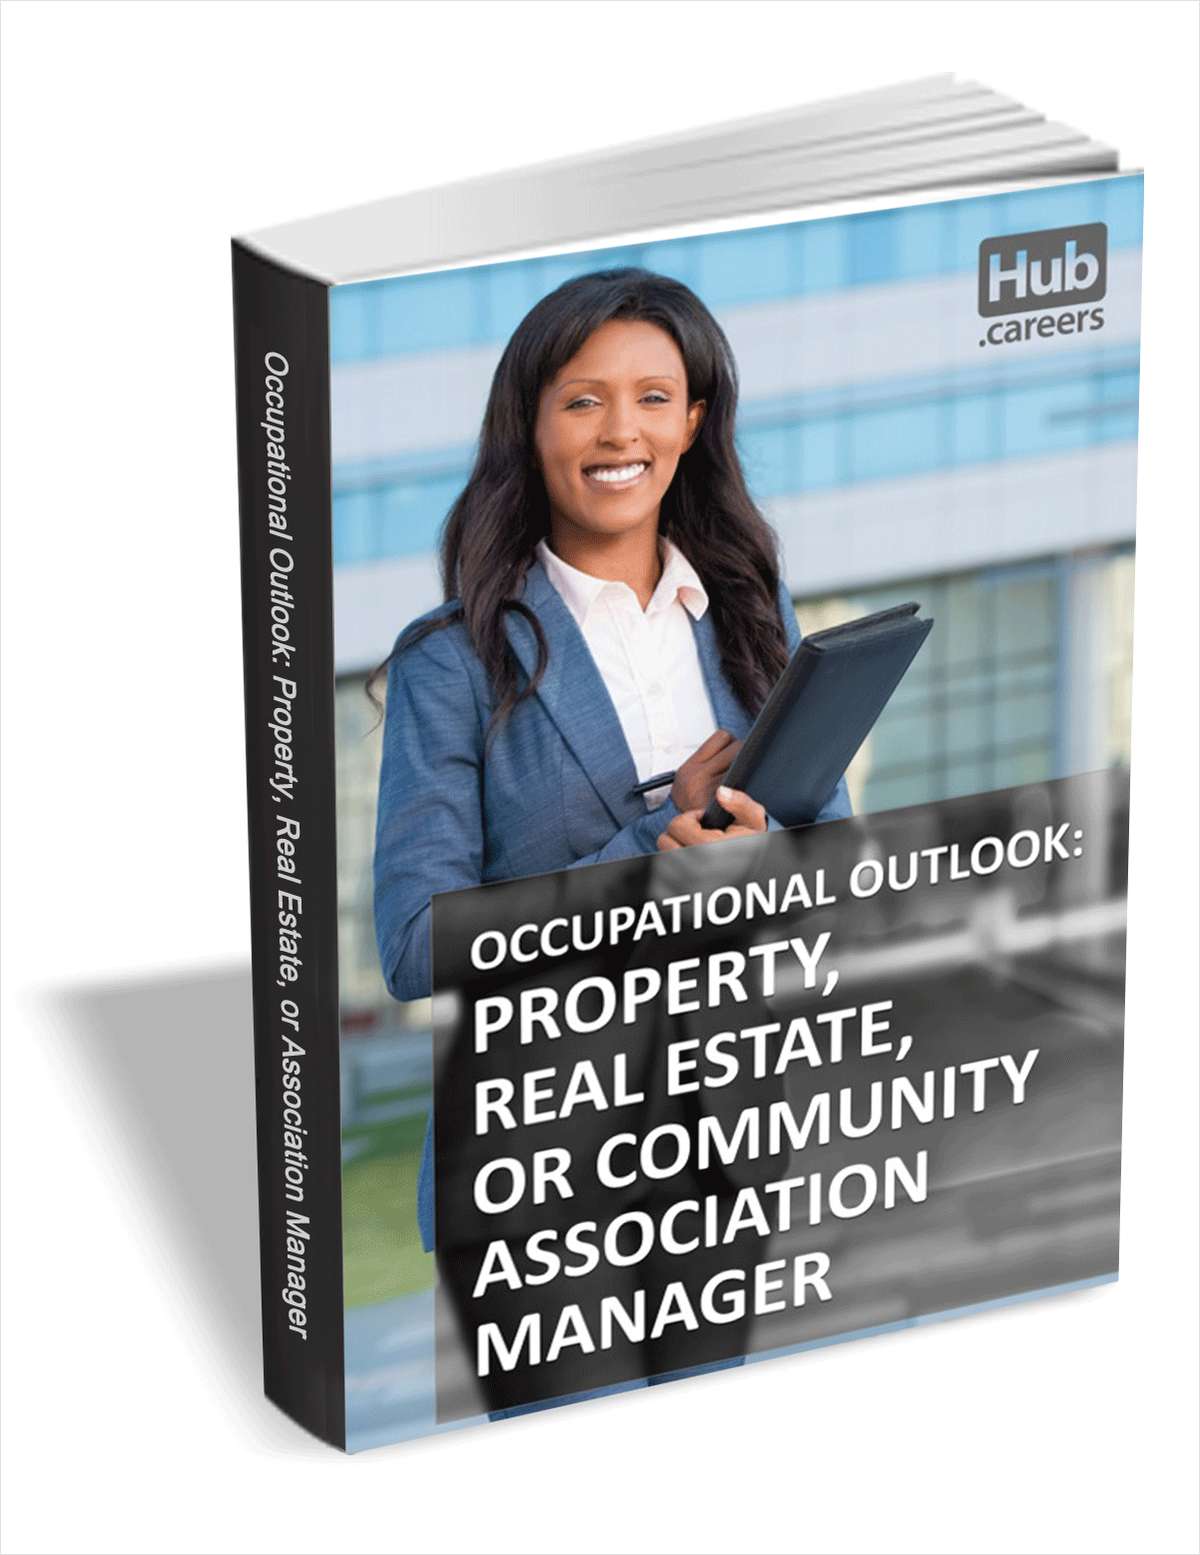 Property Real Estate and Community Association Managers - Occupational Outlook